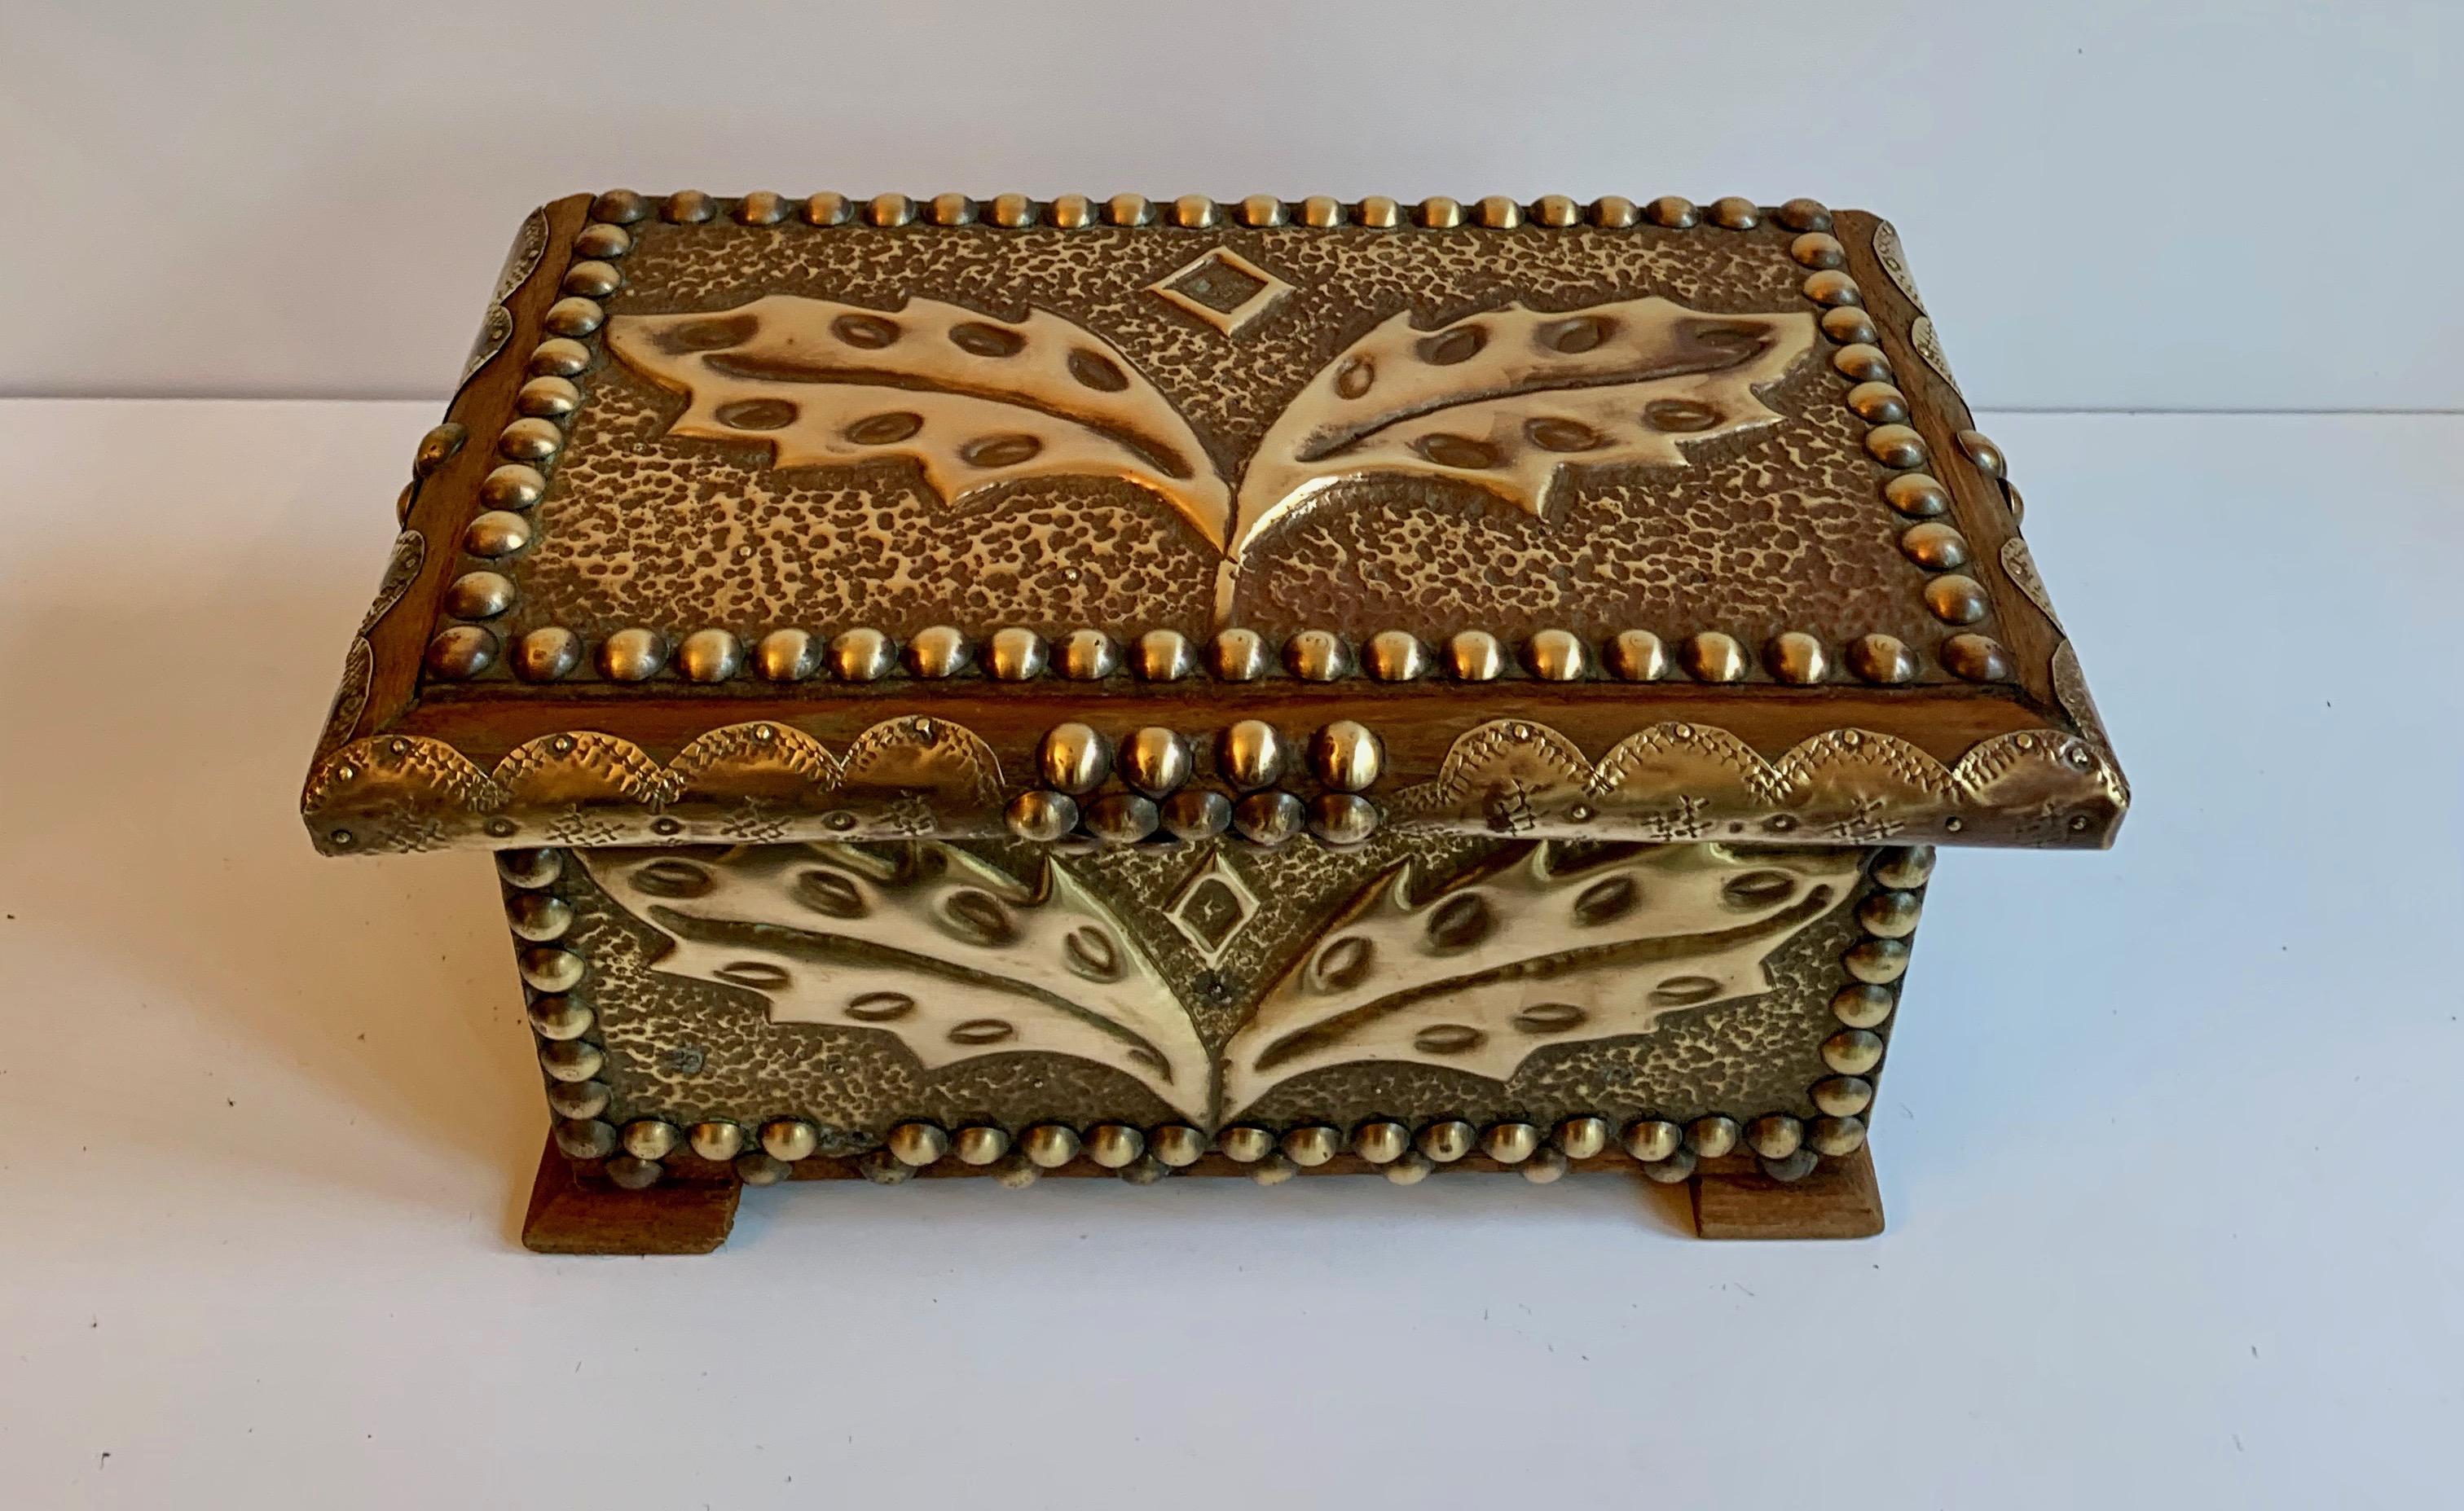 Unique and very detailed wooden box with compartments - Brass trim and nailheads give the piece a most interesting and stunning look - wonderful on a desk or vanity... a conversation piece for sure. Handmade gifts, jewelry box.